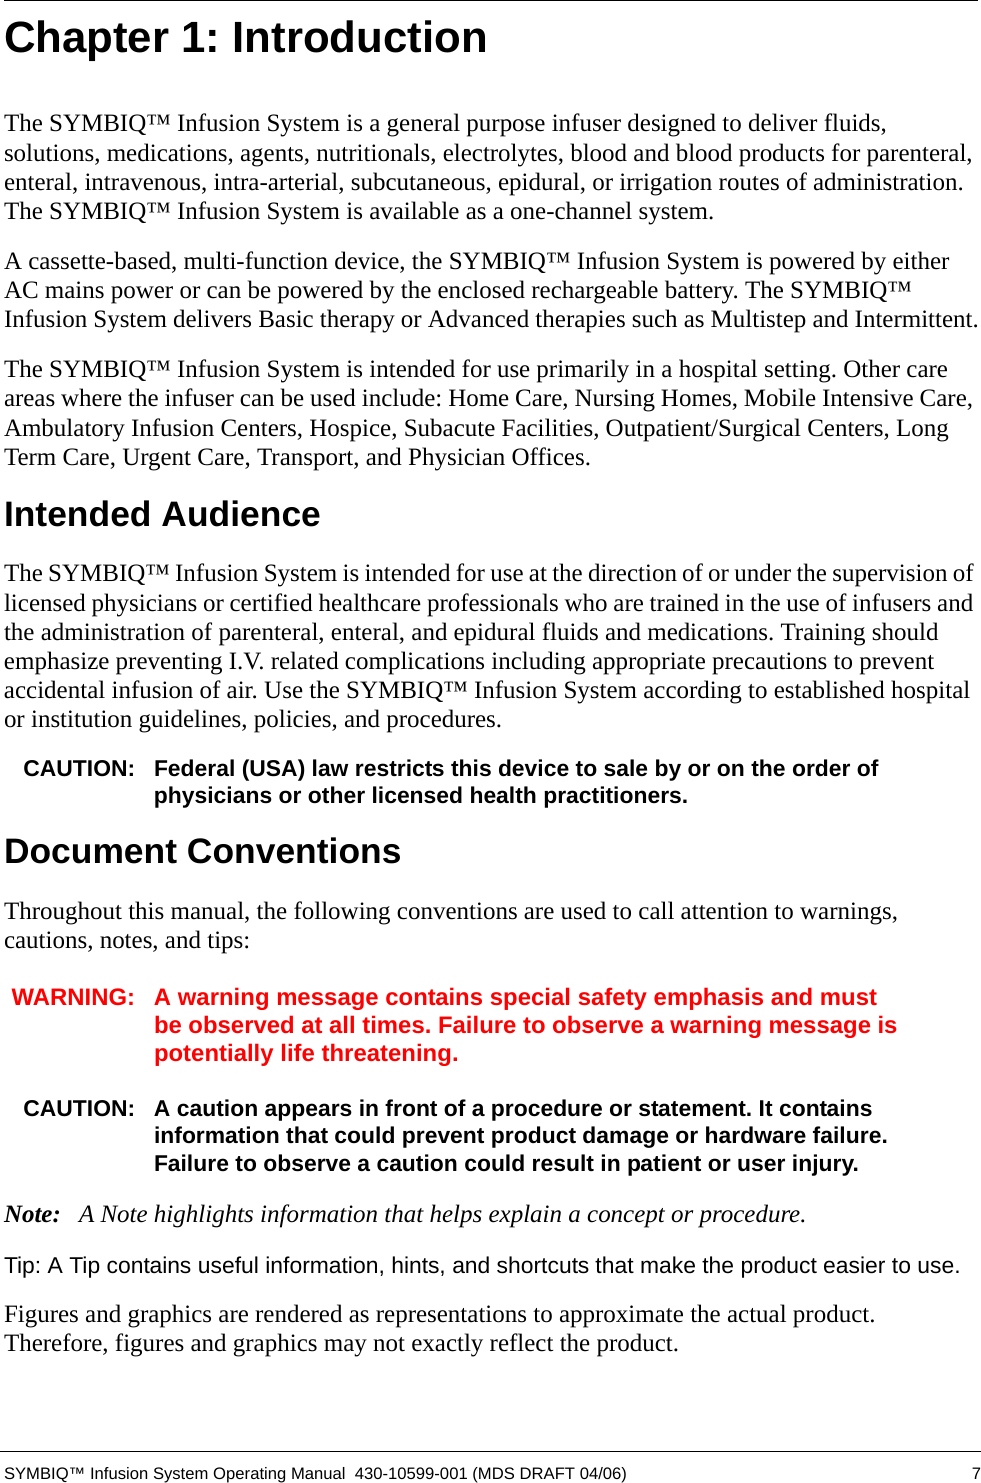 SYMBIQ™ Infusion System Operating Manual  430-10599-001 (MDS DRAFT 04/06) 7Chapter 1: IntroductionThe SYMBIQ™ Infusion System is a general purpose infuser designed to deliver fluids, solutions, medications, agents, nutritionals, electrolytes, blood and blood products for parenteral, enteral, intravenous, intra-arterial, subcutaneous, epidural, or irrigation routes of administration. The SYMBIQ™ Infusion System is available as a one-channel system.A cassette-based, multi-function device, the SYMBIQ™ Infusion System is powered by either AC mains power or can be powered by the enclosed rechargeable battery. The SYMBIQ™ Infusion System delivers Basic therapy or Advanced therapies such as Multistep and Intermittent.The SYMBIQ™ Infusion System is intended for use primarily in a hospital setting. Other care areas where the infuser can be used include: Home Care, Nursing Homes, Mobile Intensive Care, Ambulatory Infusion Centers, Hospice, Subacute Facilities, Outpatient/Surgical Centers, Long Term Care, Urgent Care, Transport, and Physician Offices.Intended AudienceThe SYMBIQ™ Infusion System is intended for use at the direction of or under the supervision of licensed physicians or certified healthcare professionals who are trained in the use of infusers and the administration of parenteral, enteral, and epidural fluids and medications. Training should emphasize preventing I.V. related complications including appropriate precautions to prevent accidental infusion of air. Use the SYMBIQ™ Infusion System according to established hospital or institution guidelines, policies, and procedures.CAUTION: Federal (USA) law restricts this device to sale by or on the order of physicians or other licensed health practitioners.Document ConventionsThroughout this manual, the following conventions are used to call attention to warnings, cautions, notes, and tips:WARNING: A warning message contains special safety emphasis and must be observed at all times. Failure to observe a warning message is potentially life threatening.CAUTION: A caution appears in front of a procedure or statement. It contains information that could prevent product damage or hardware failure. Failure to observe a caution could result in patient or user injury.Note: A Note highlights information that helps explain a concept or procedure.Tip: A Tip contains useful information, hints, and shortcuts that make the product easier to use.Figures and graphics are rendered as representations to approximate the actual product. Therefore, figures and graphics may not exactly reflect the product.